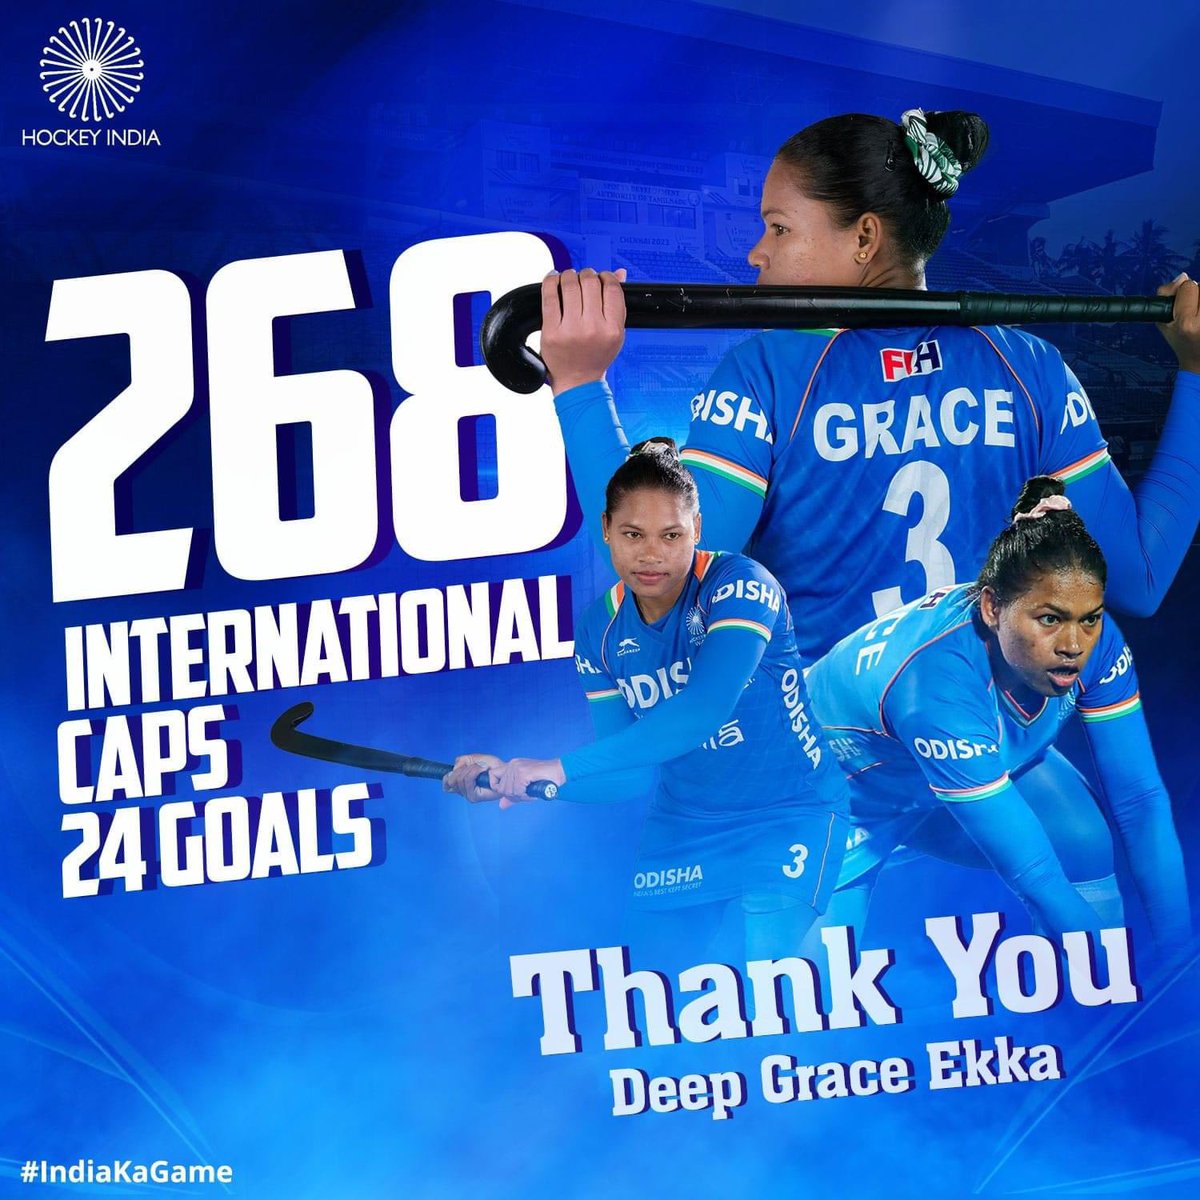 She will be missed as as player and as a person. She had always a smile on her face and her ❤️ on the right place. @grace_ekka wish the best in your future🙏🏻